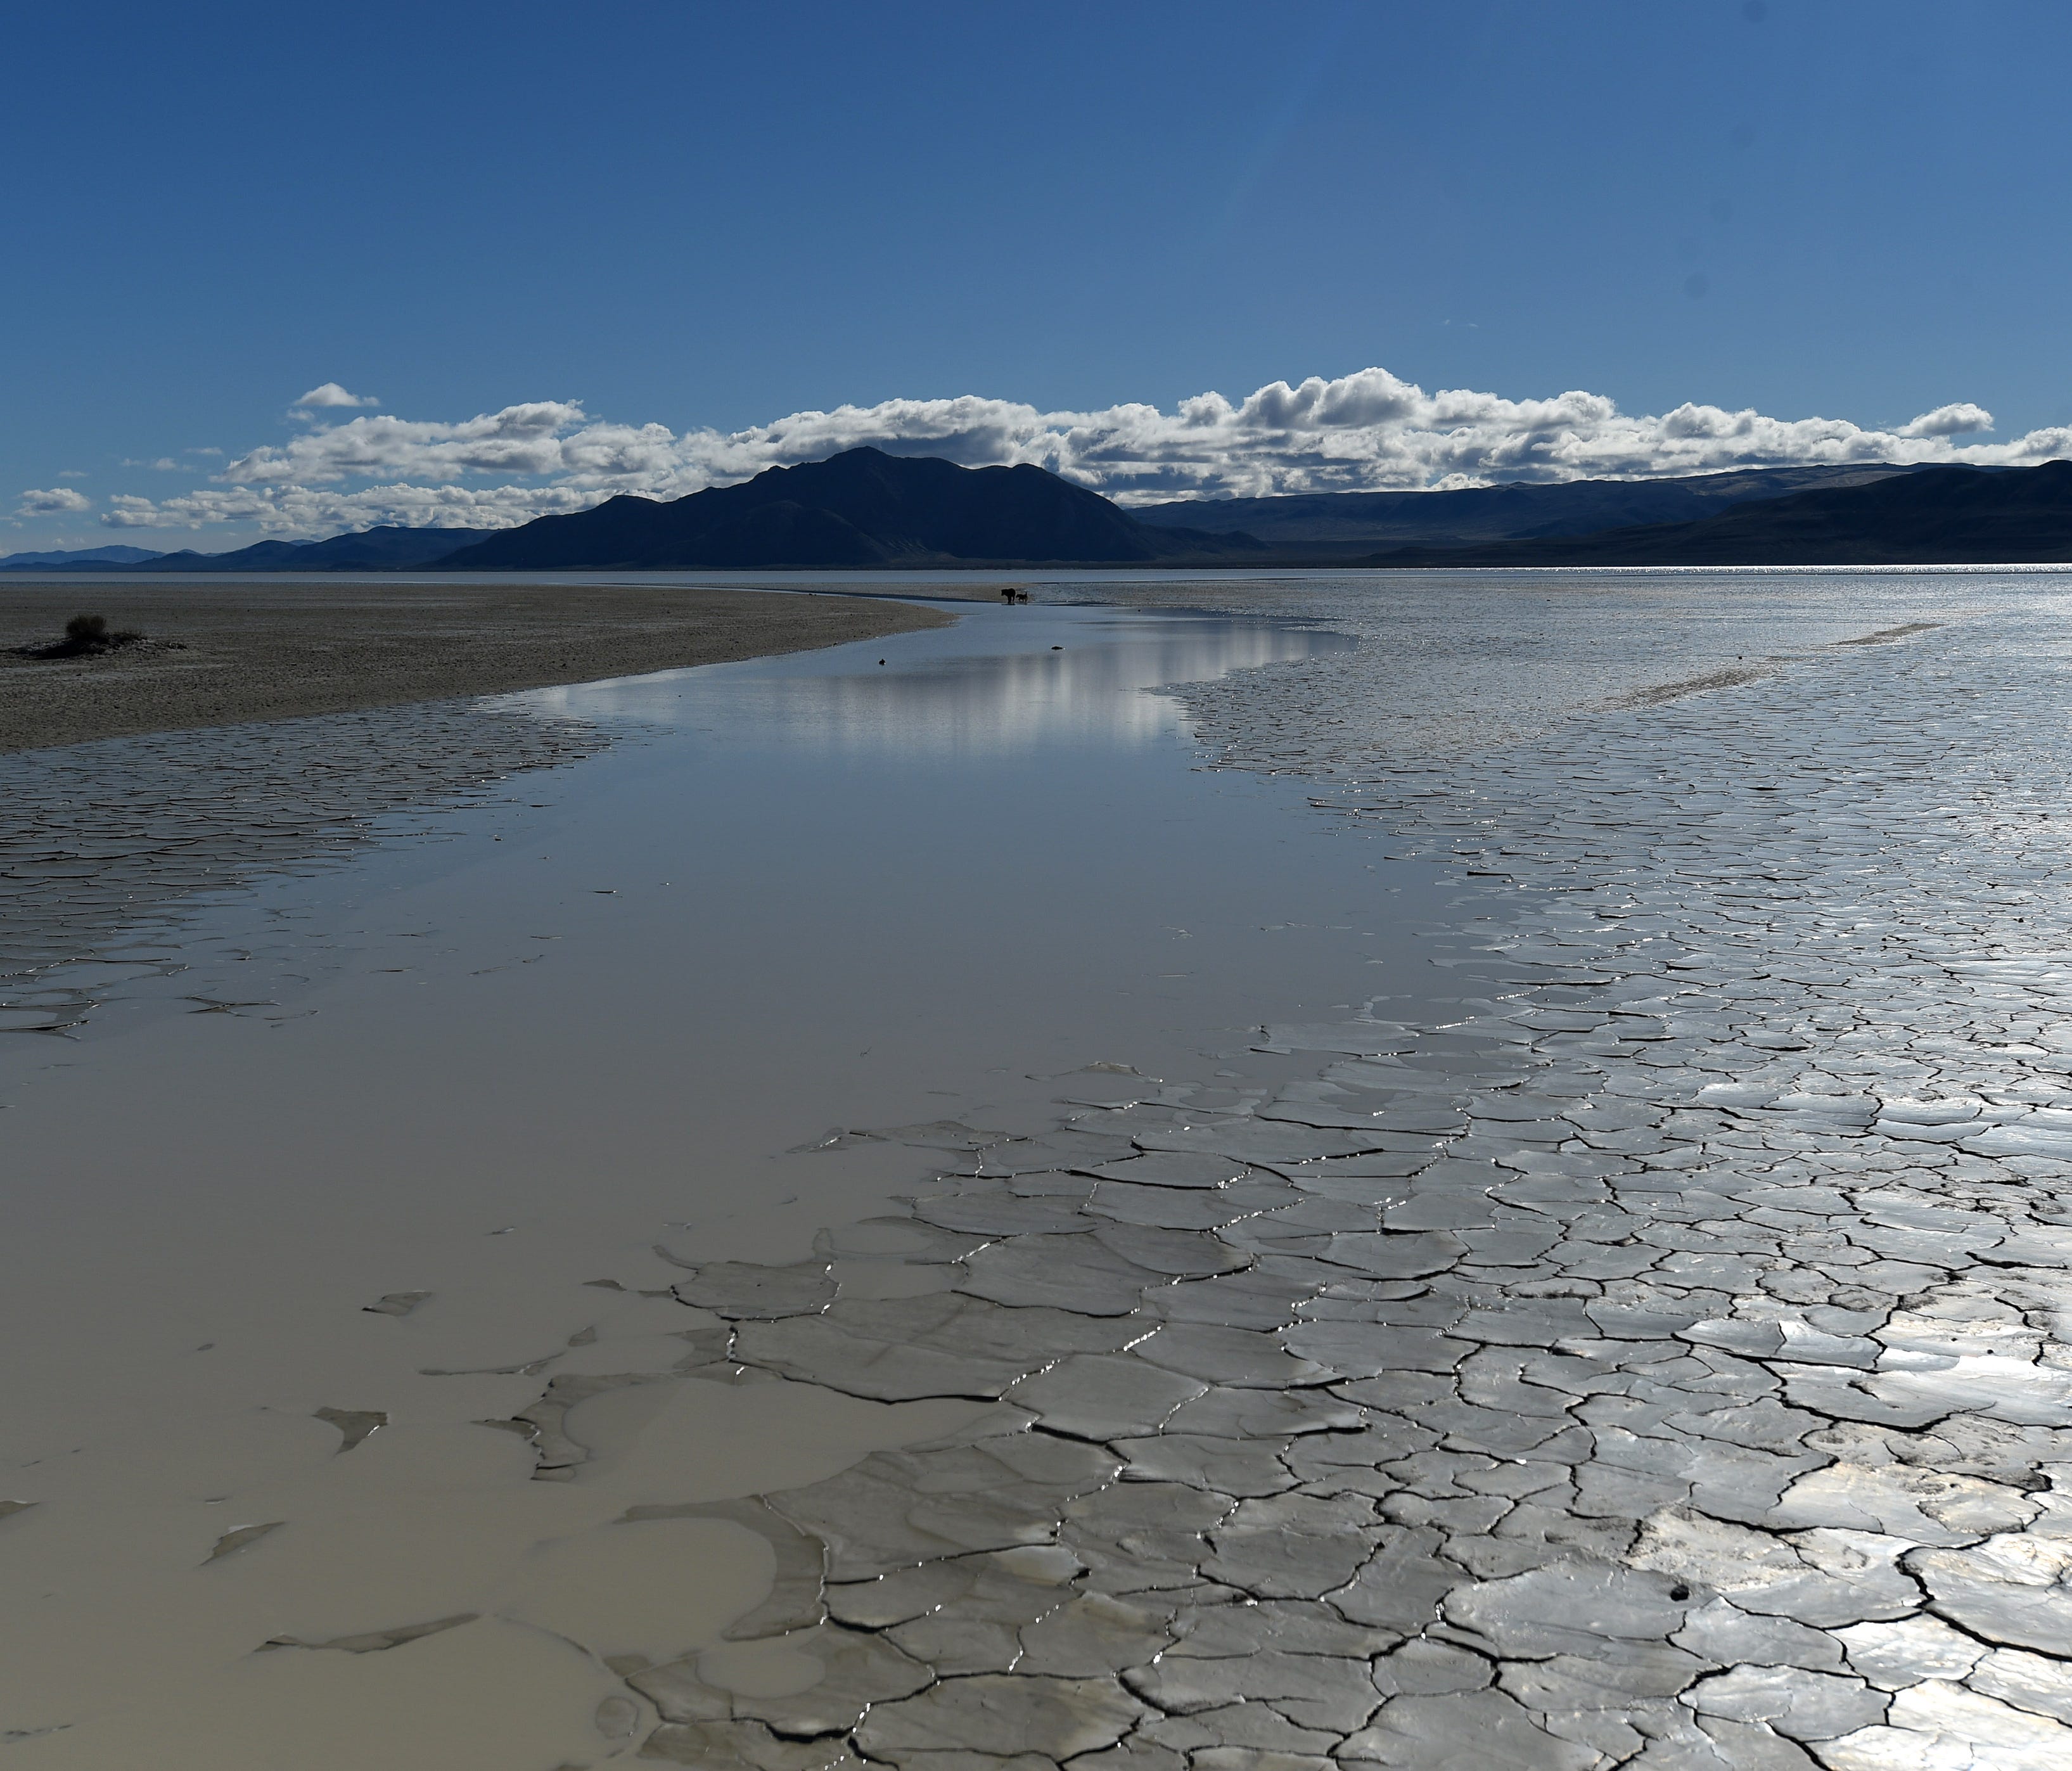 Water is seen covering the Black Rock Desert playa north of Gerlach, Nevada on March 25, 2017.